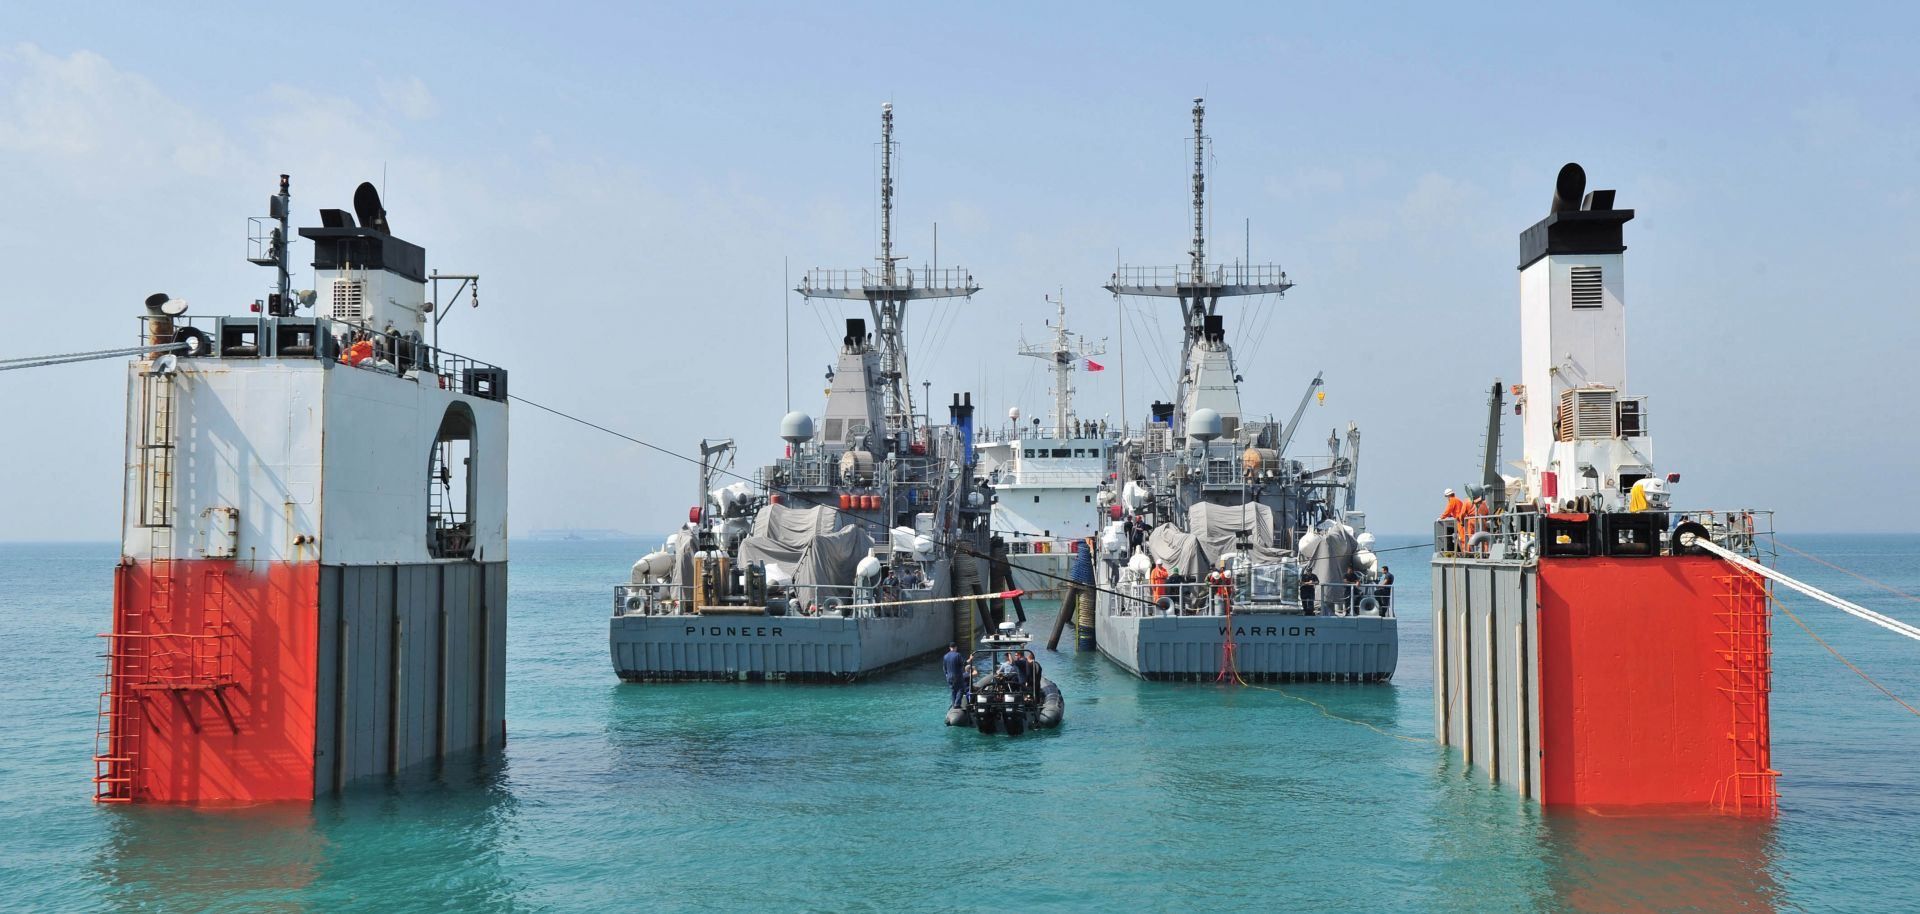 In calm turquoise waters two mine countermeasure ships USS Pioneer and USS Warrior prepare for transport.